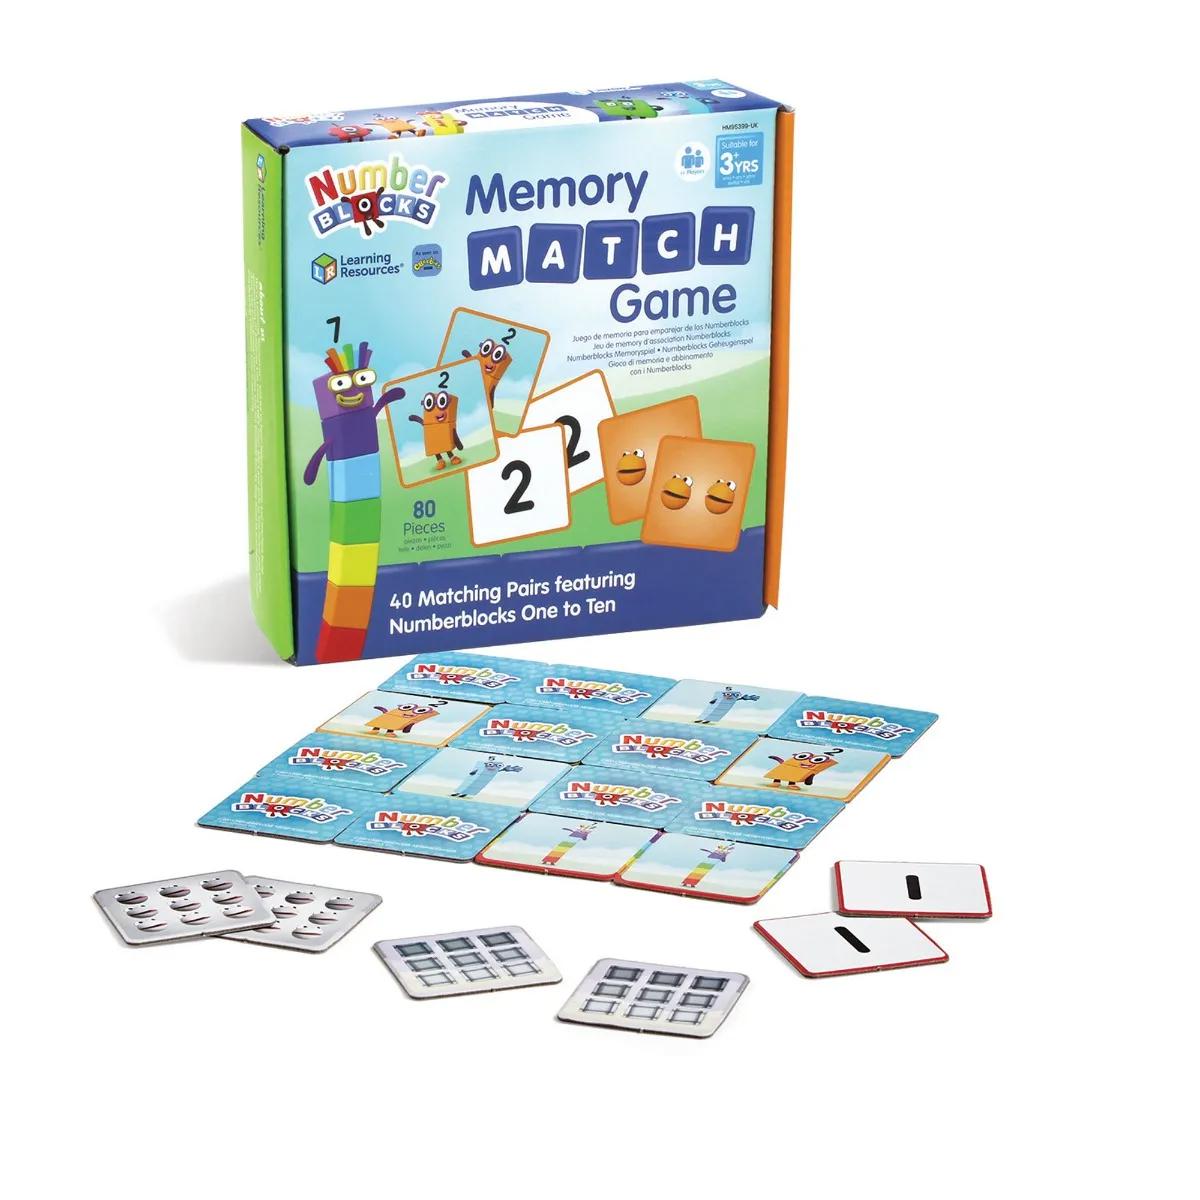 Numberblocks Memory Match Game-Board Games-Learning Resources-Yes Bebe